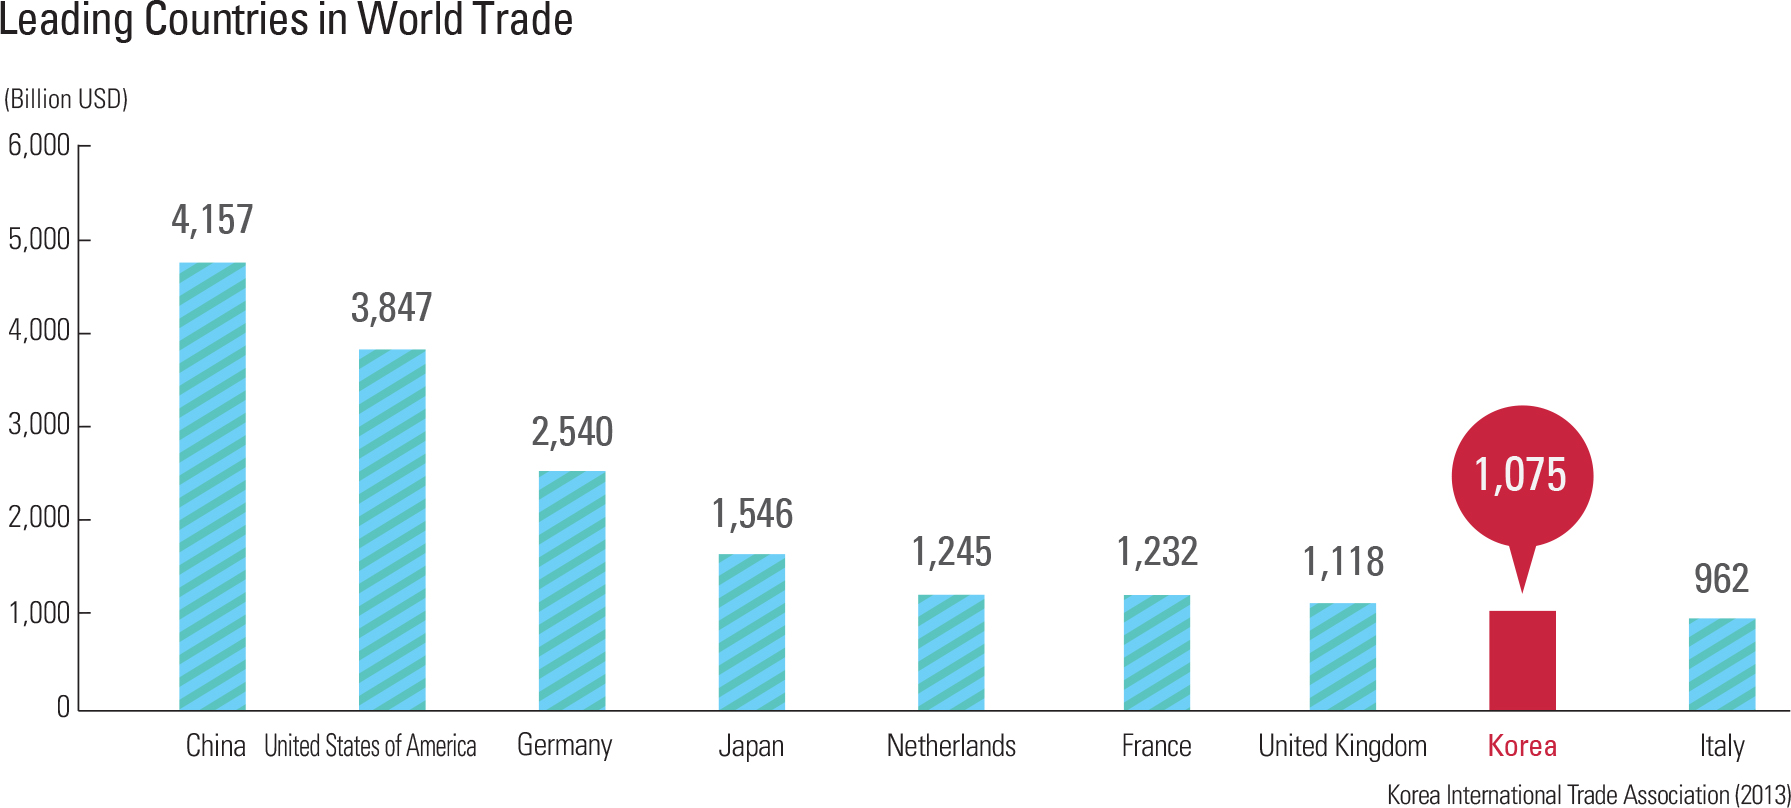  Leading Countries in World Trade